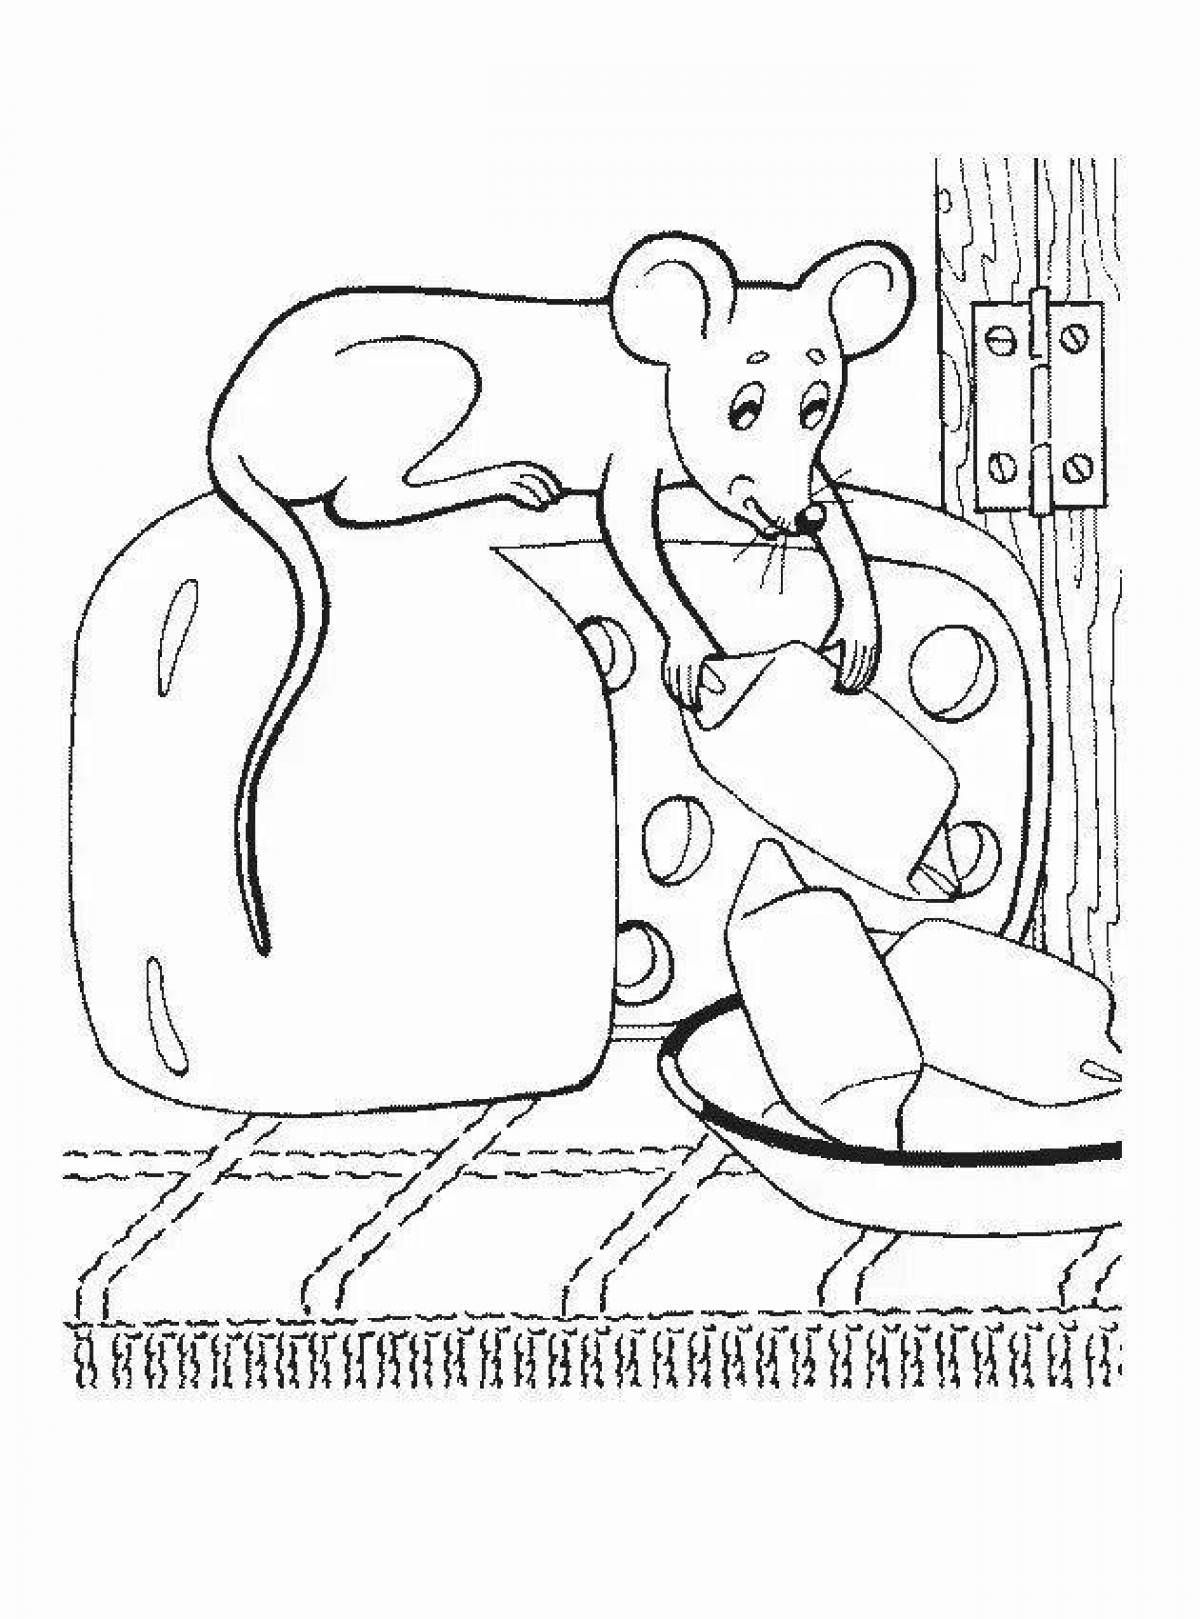 Silly mouse tale coloring page